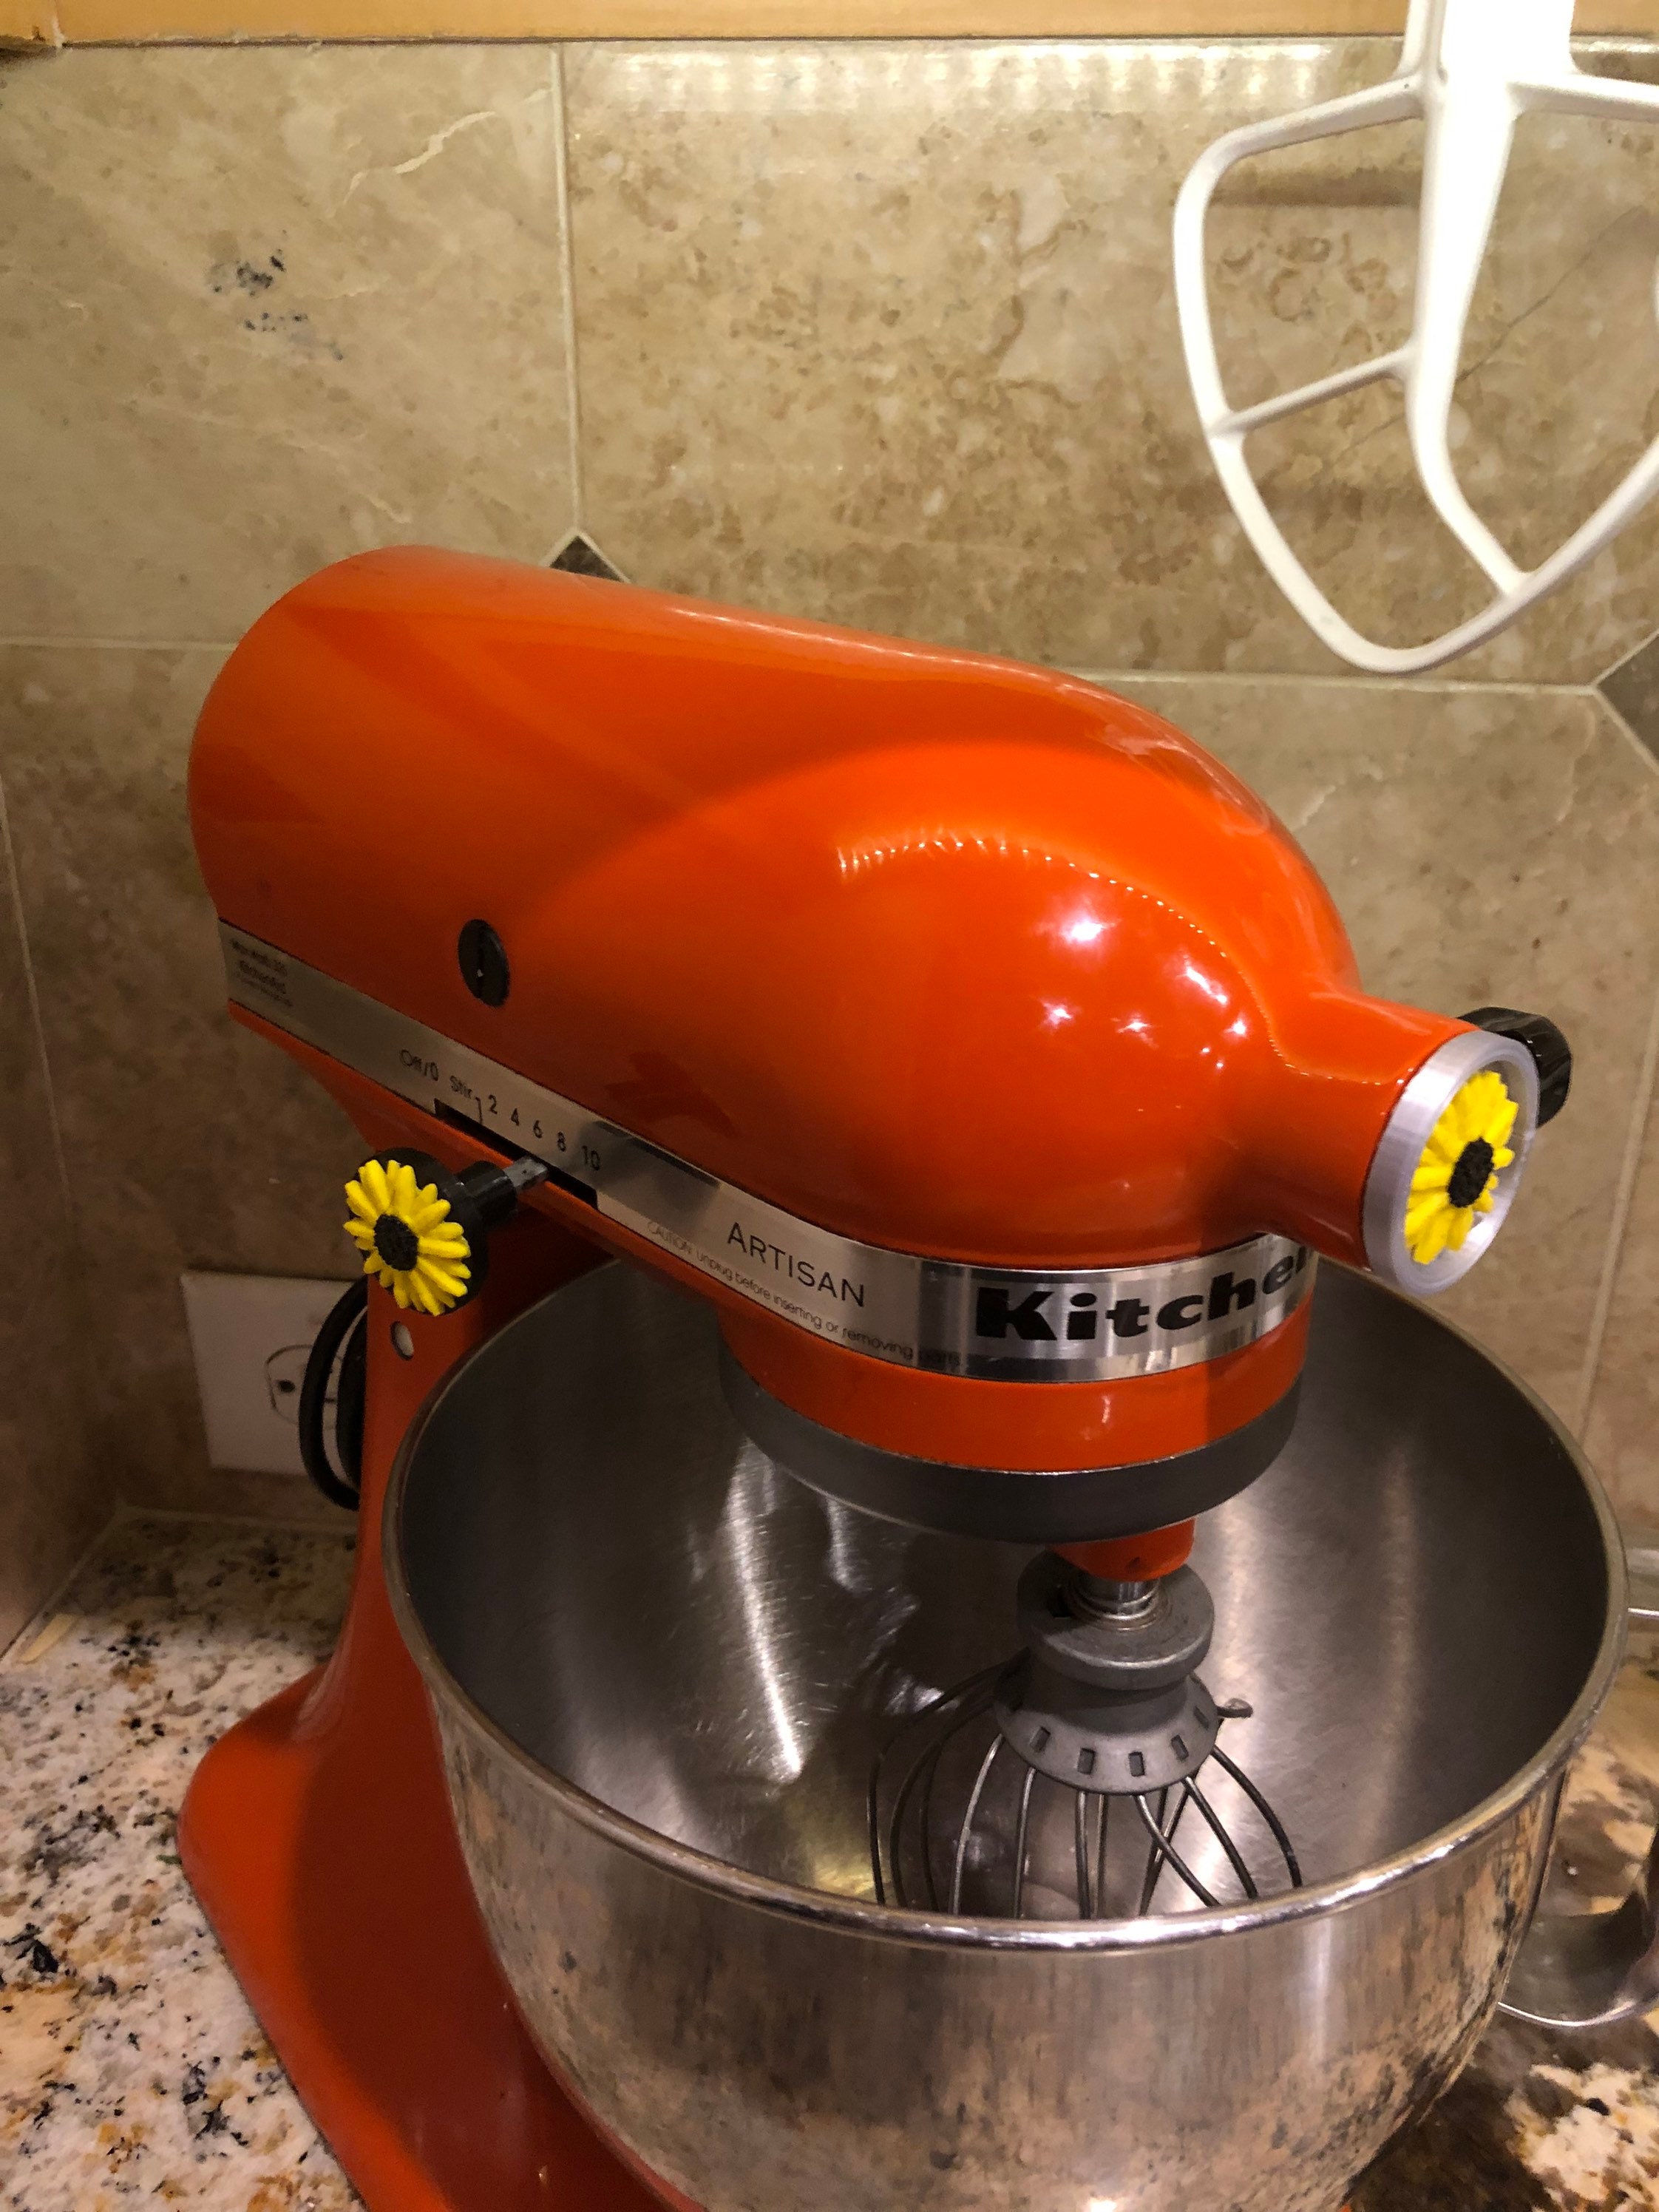 KitchenAid Cover for Your Mixer Bowl Tutorial!, GoldStar Tool